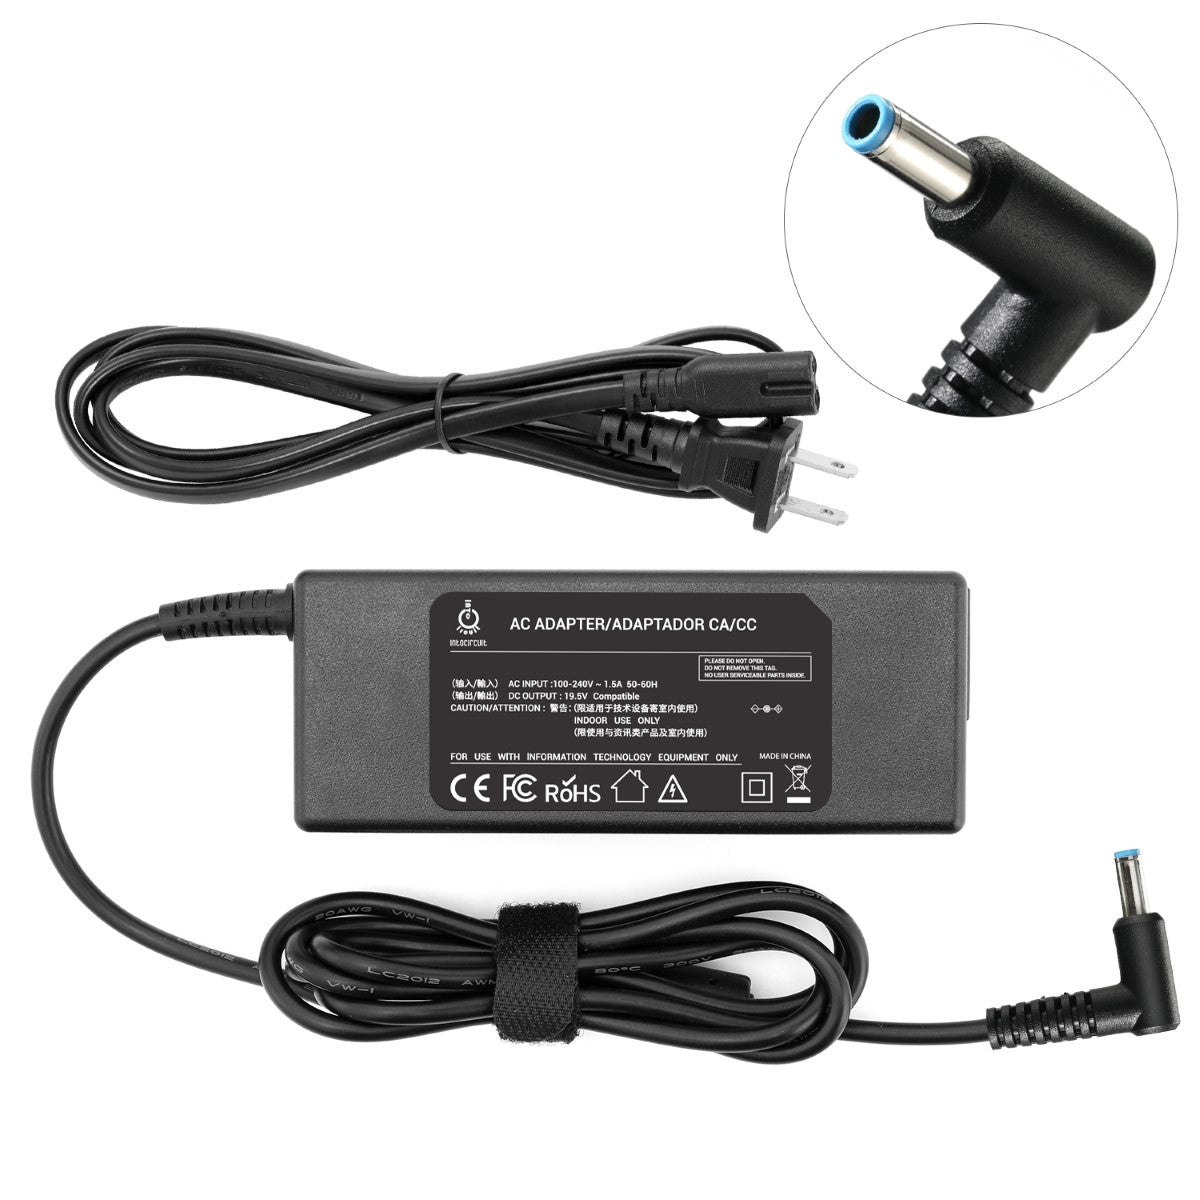 Charger for HP 15-g013dx Laptop